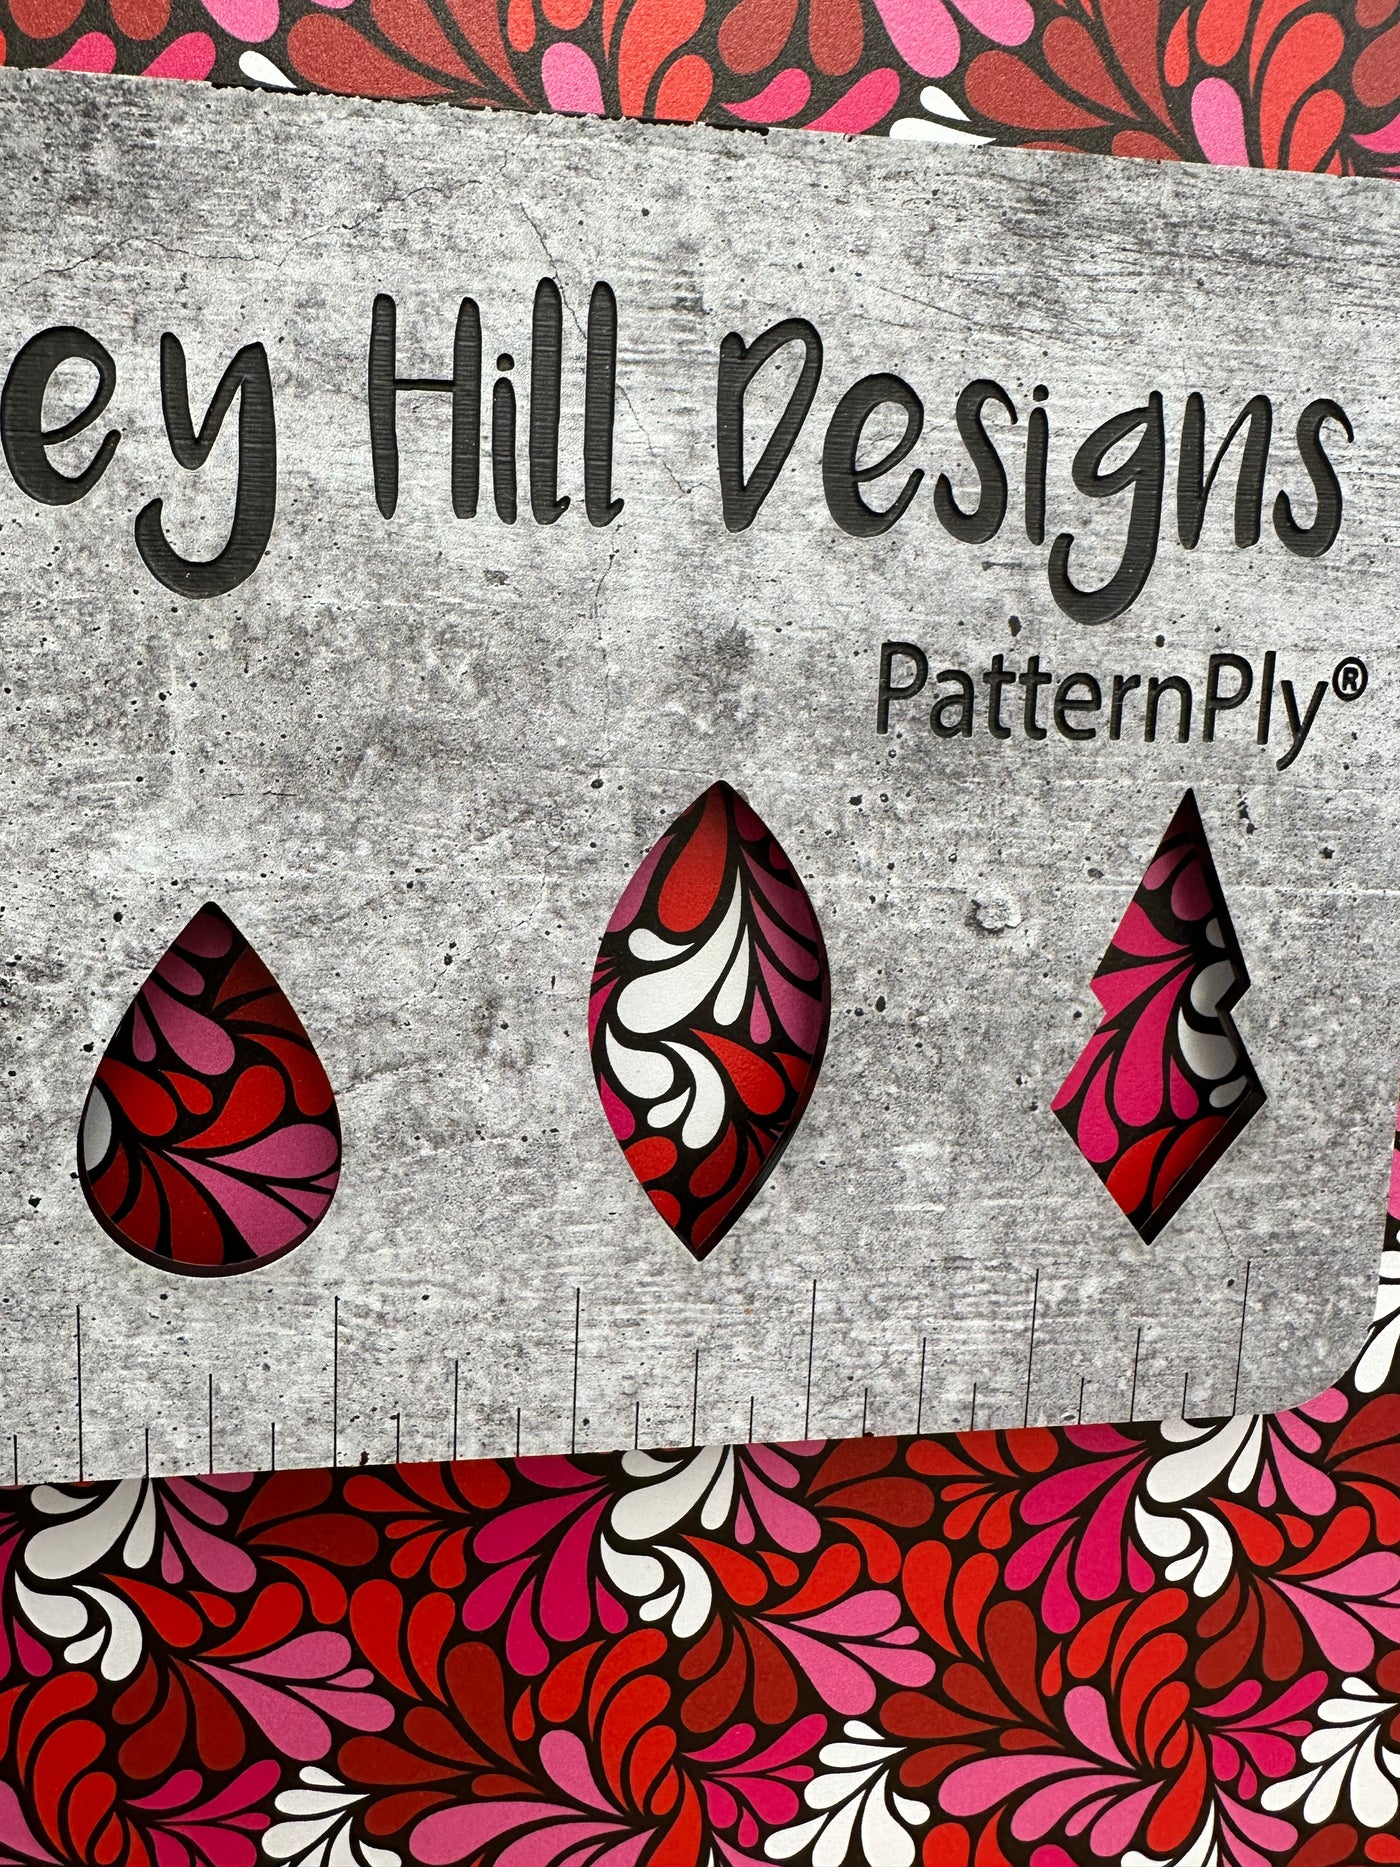 PatternPly® Red, White, and Pink Petals